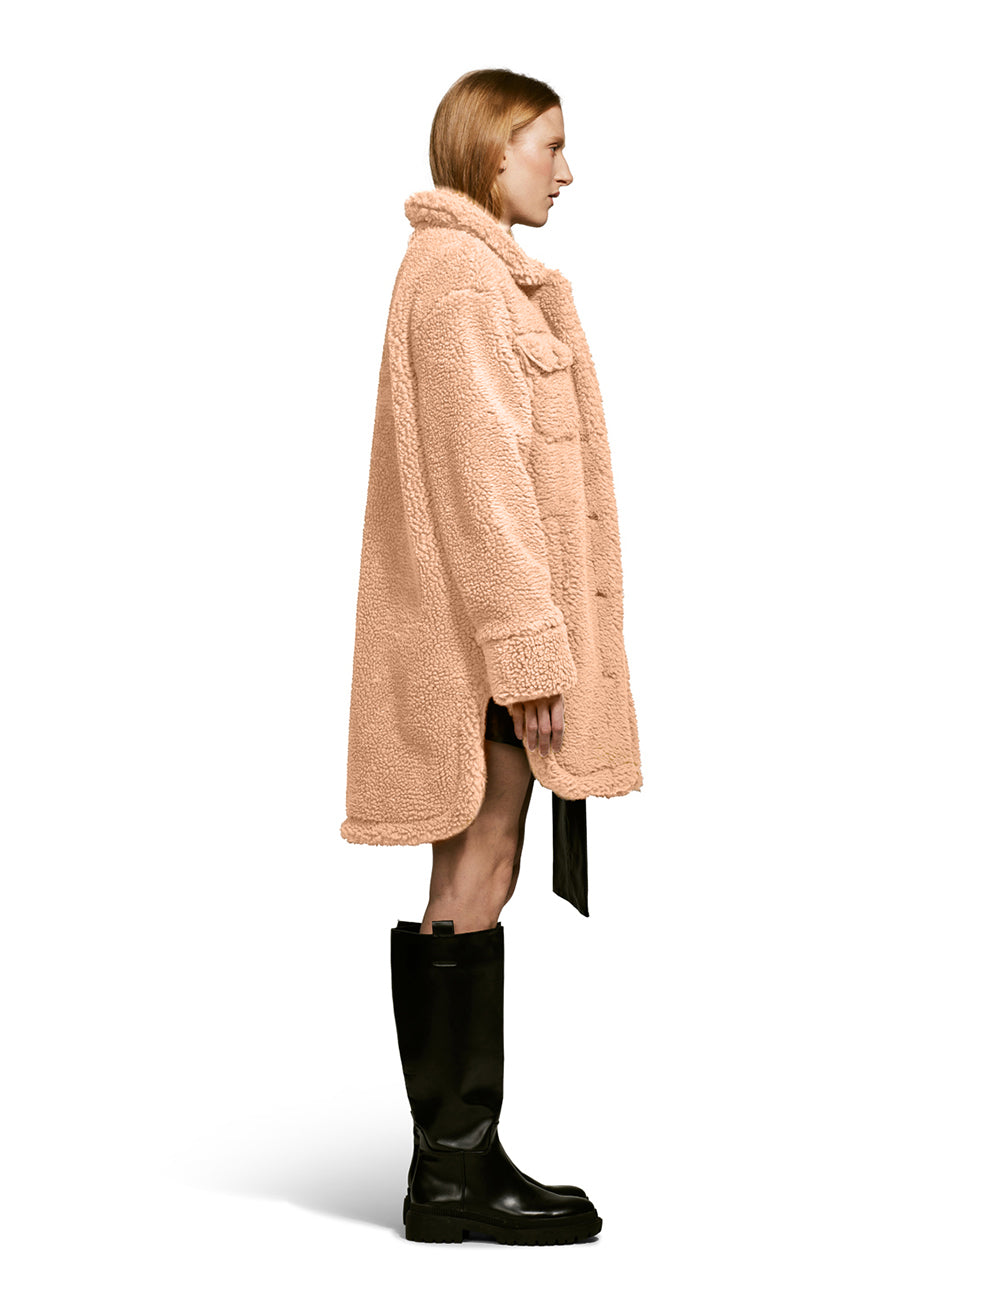 Model wearing the Ash, a teddy-inspired faux-fur sherpa shell with a laid-back silhouette in Camel.